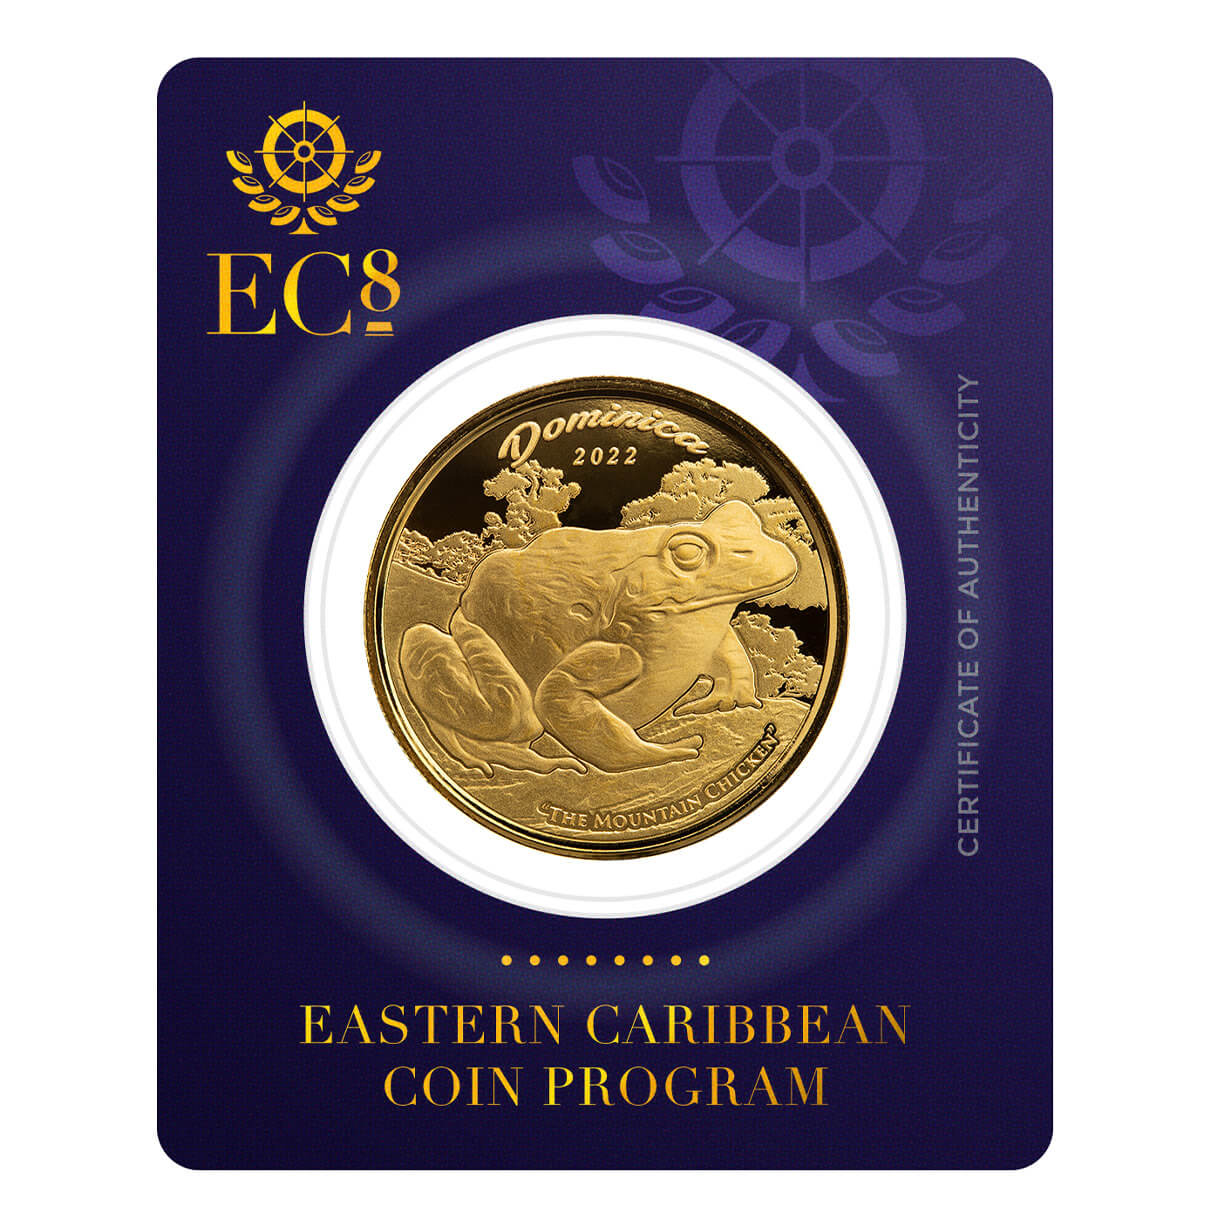 2022 Scottsdale Mint Ec8 Dominica Mountain Chicken 1 Oz Gold Proof Like Coin 03